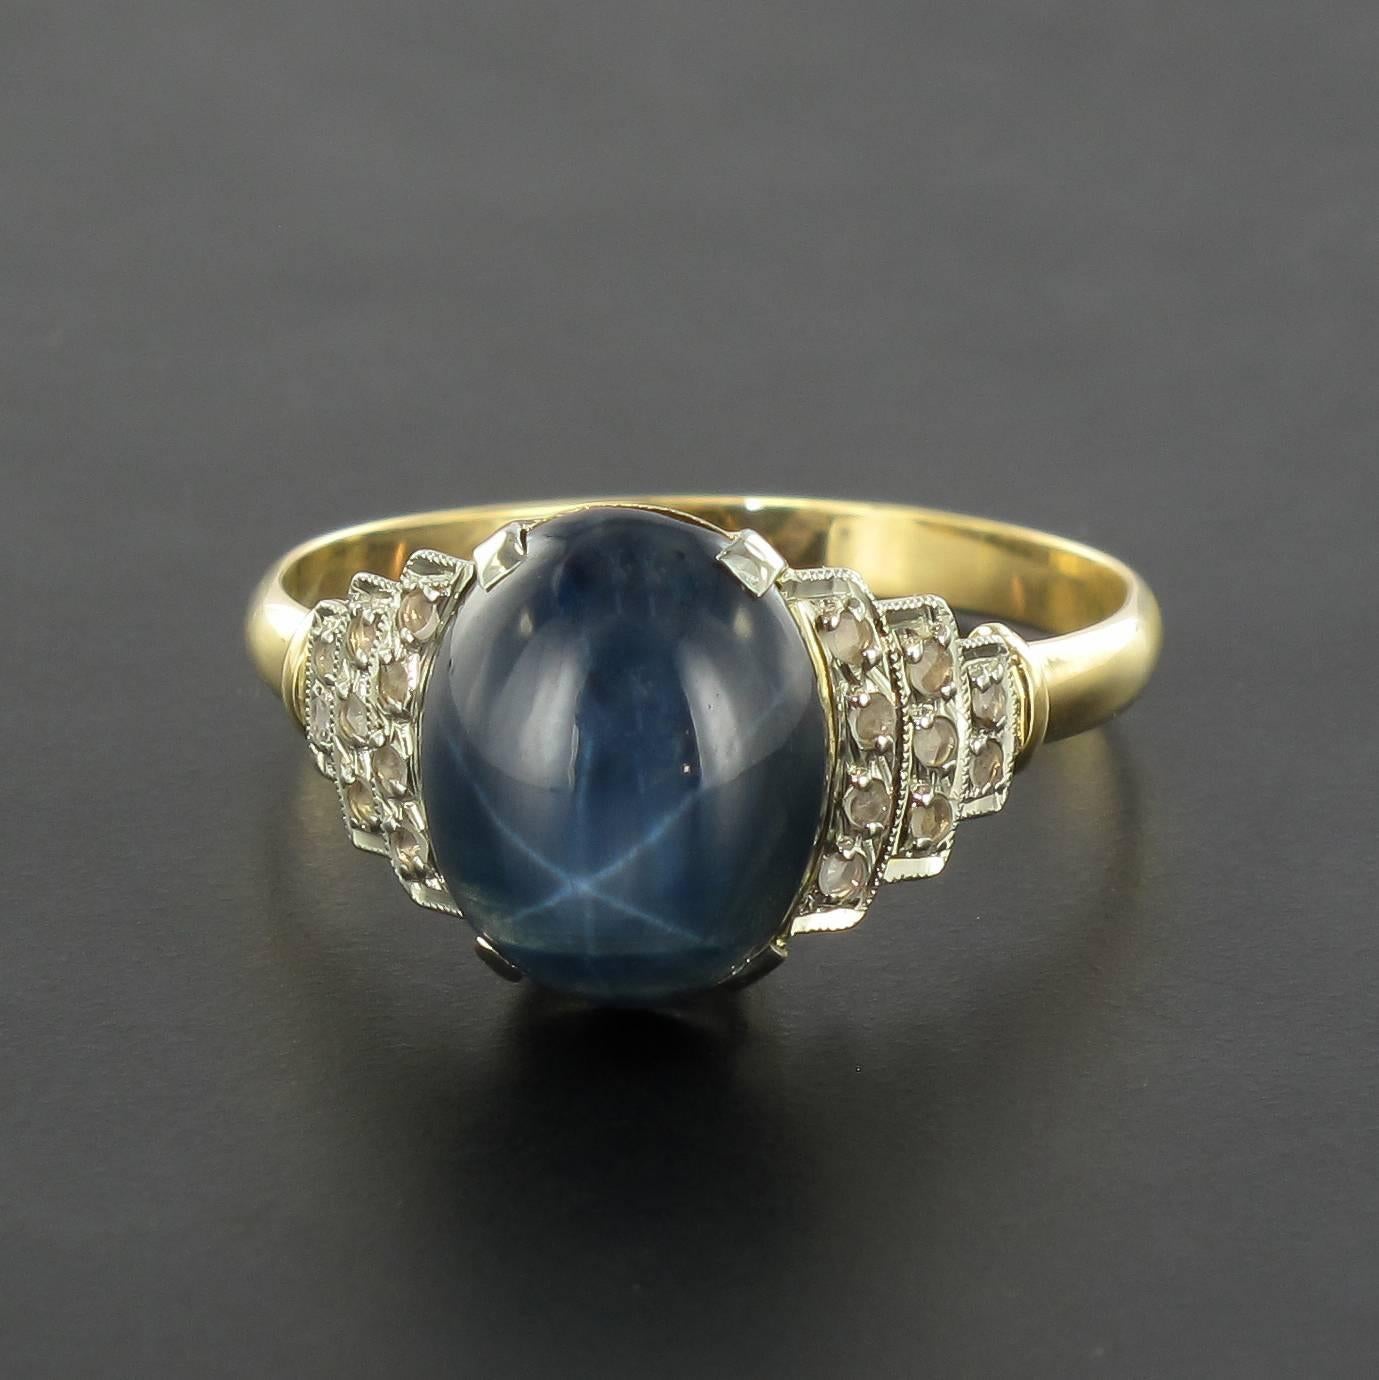 Ring in 18 carat yellow gold, eagle head hallmark. 
This gorgeous Art Deco style ring is claw set with an oval star sapphire cabochon that is accentuated by rose cut diamonds on each side in a geometric setting. 
Weight of the sapphire: 3.31 carats